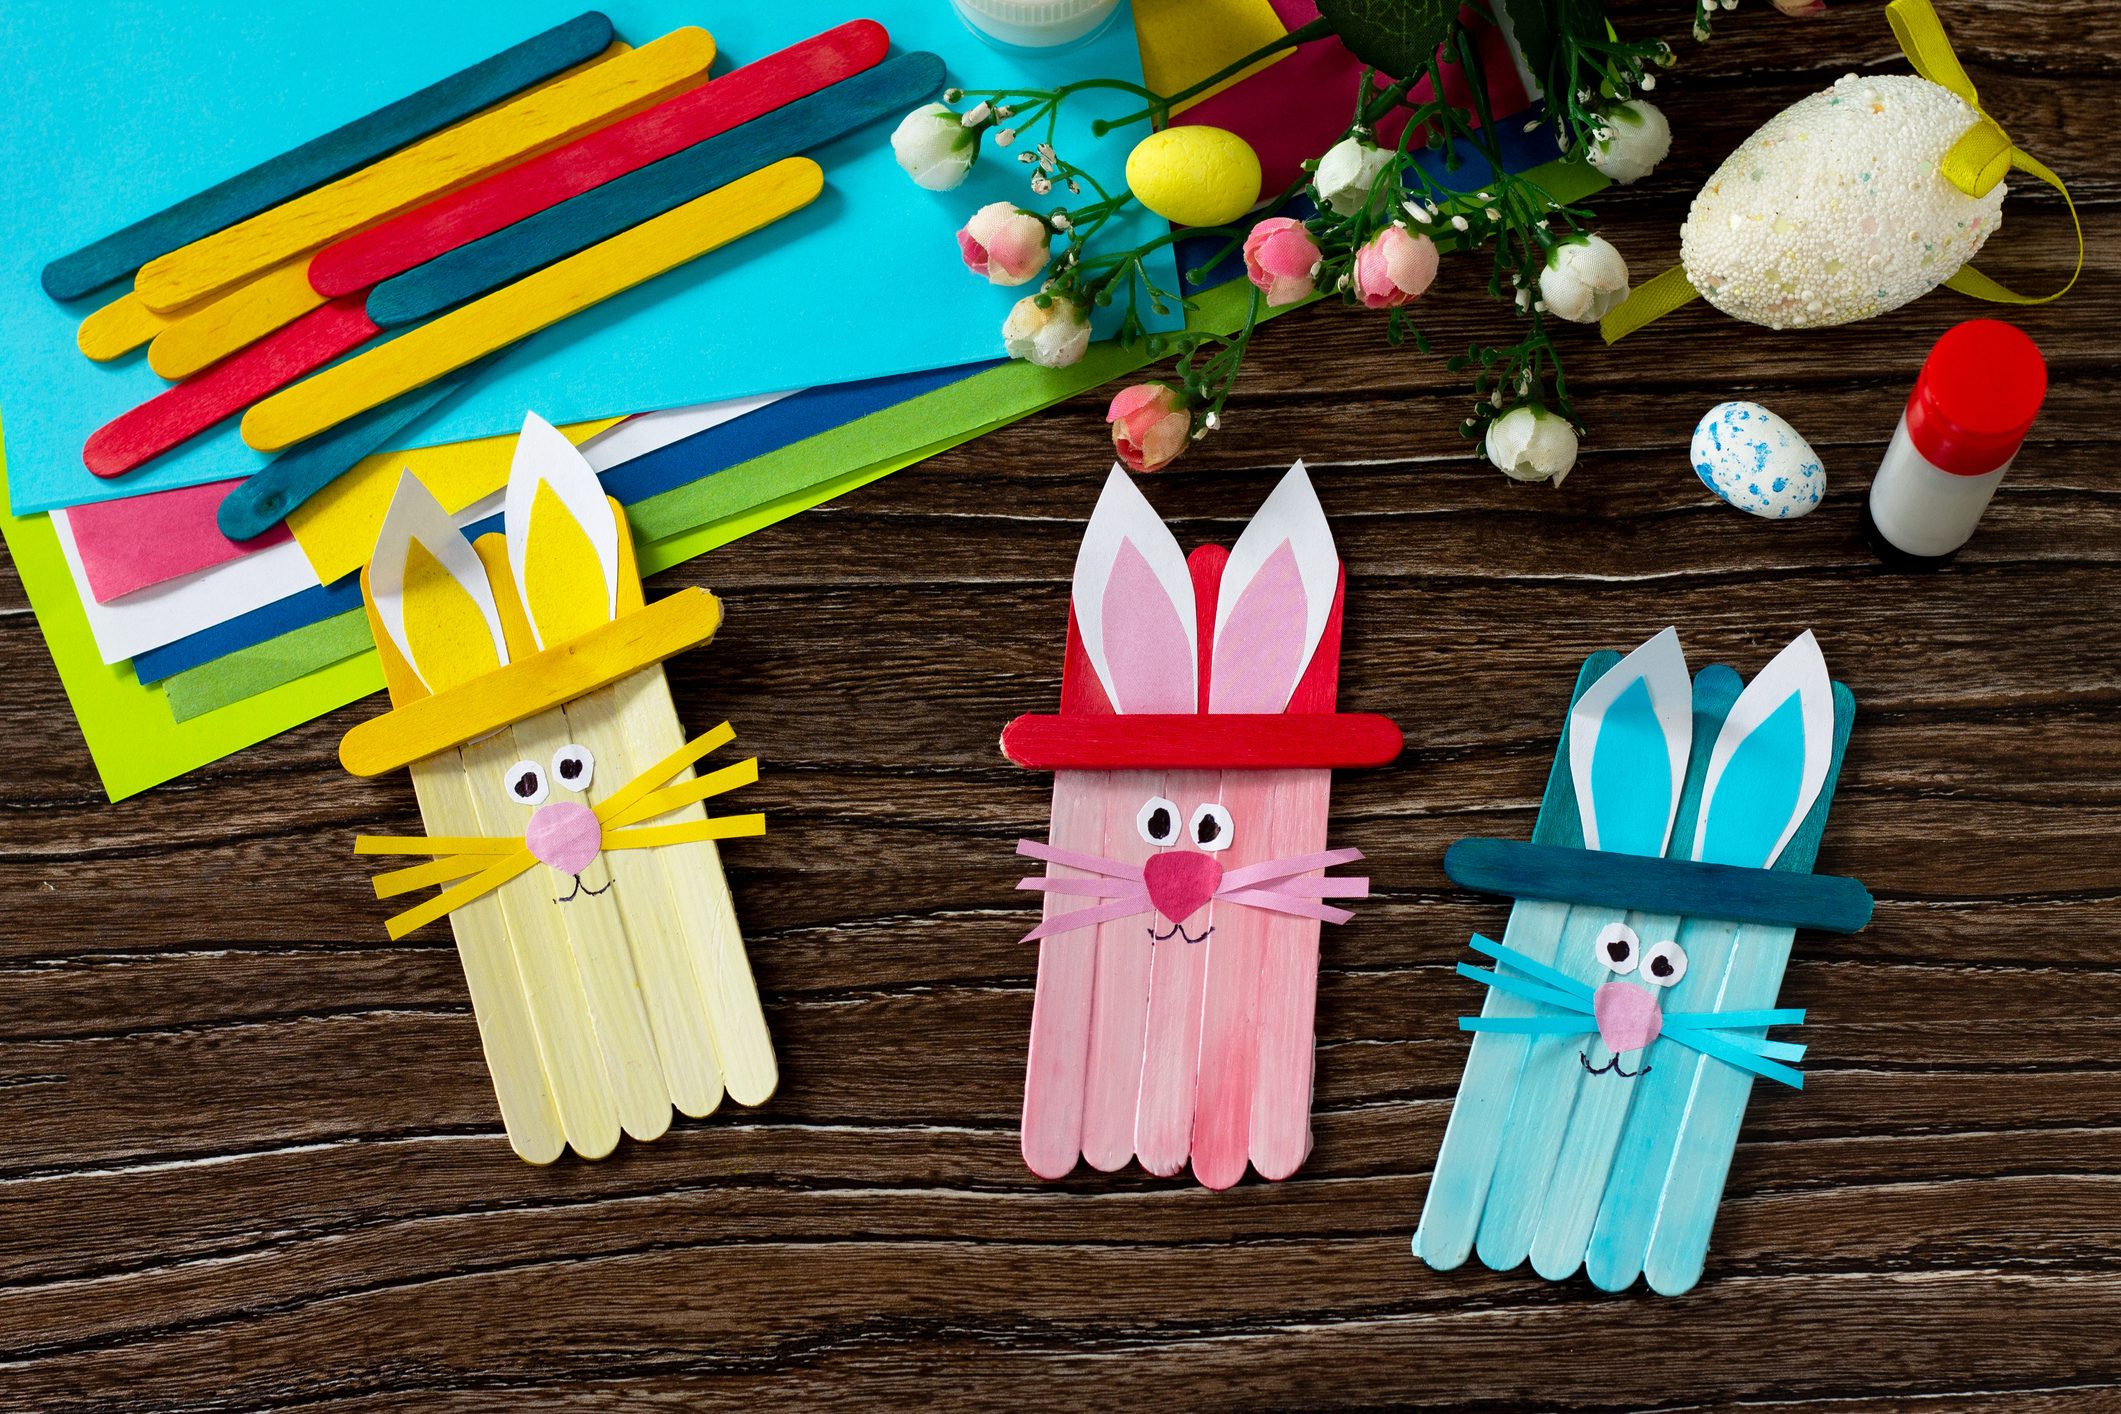 Over 33 Easter Craft Ideas for Kids to Make - Simple, Cute and Fun!